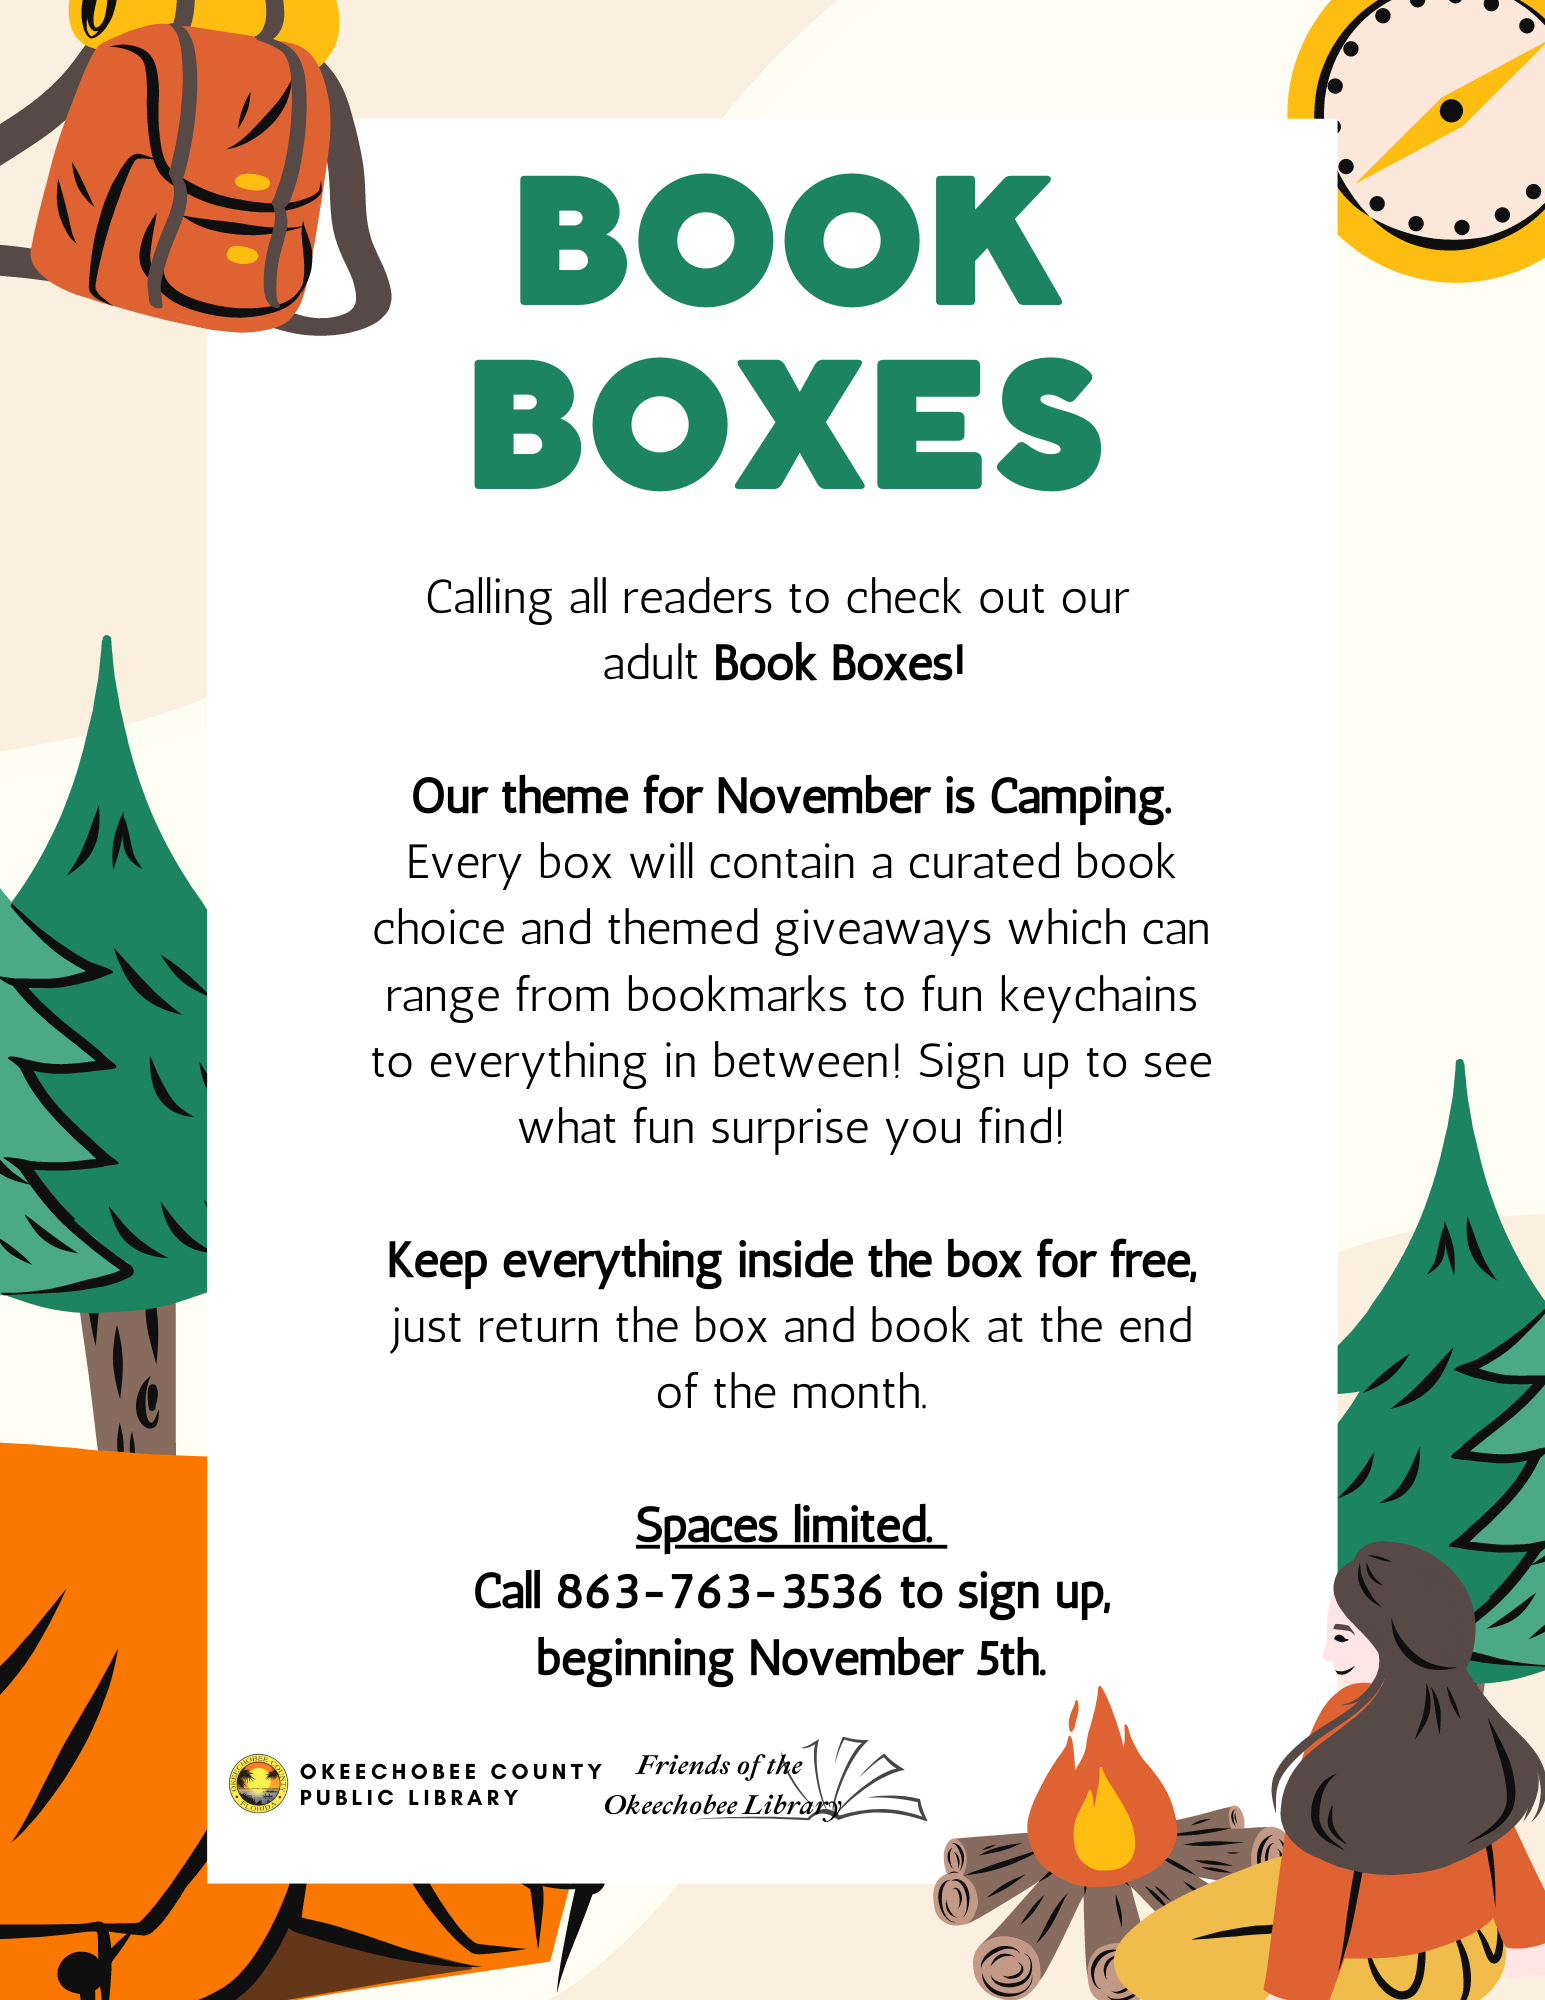  "November Book Boxes! Every box will contain a curated book choice and themed giveaways which can range from bookmarks to fun keychains to everything in between! Sign up to see what fun surprise you find!"